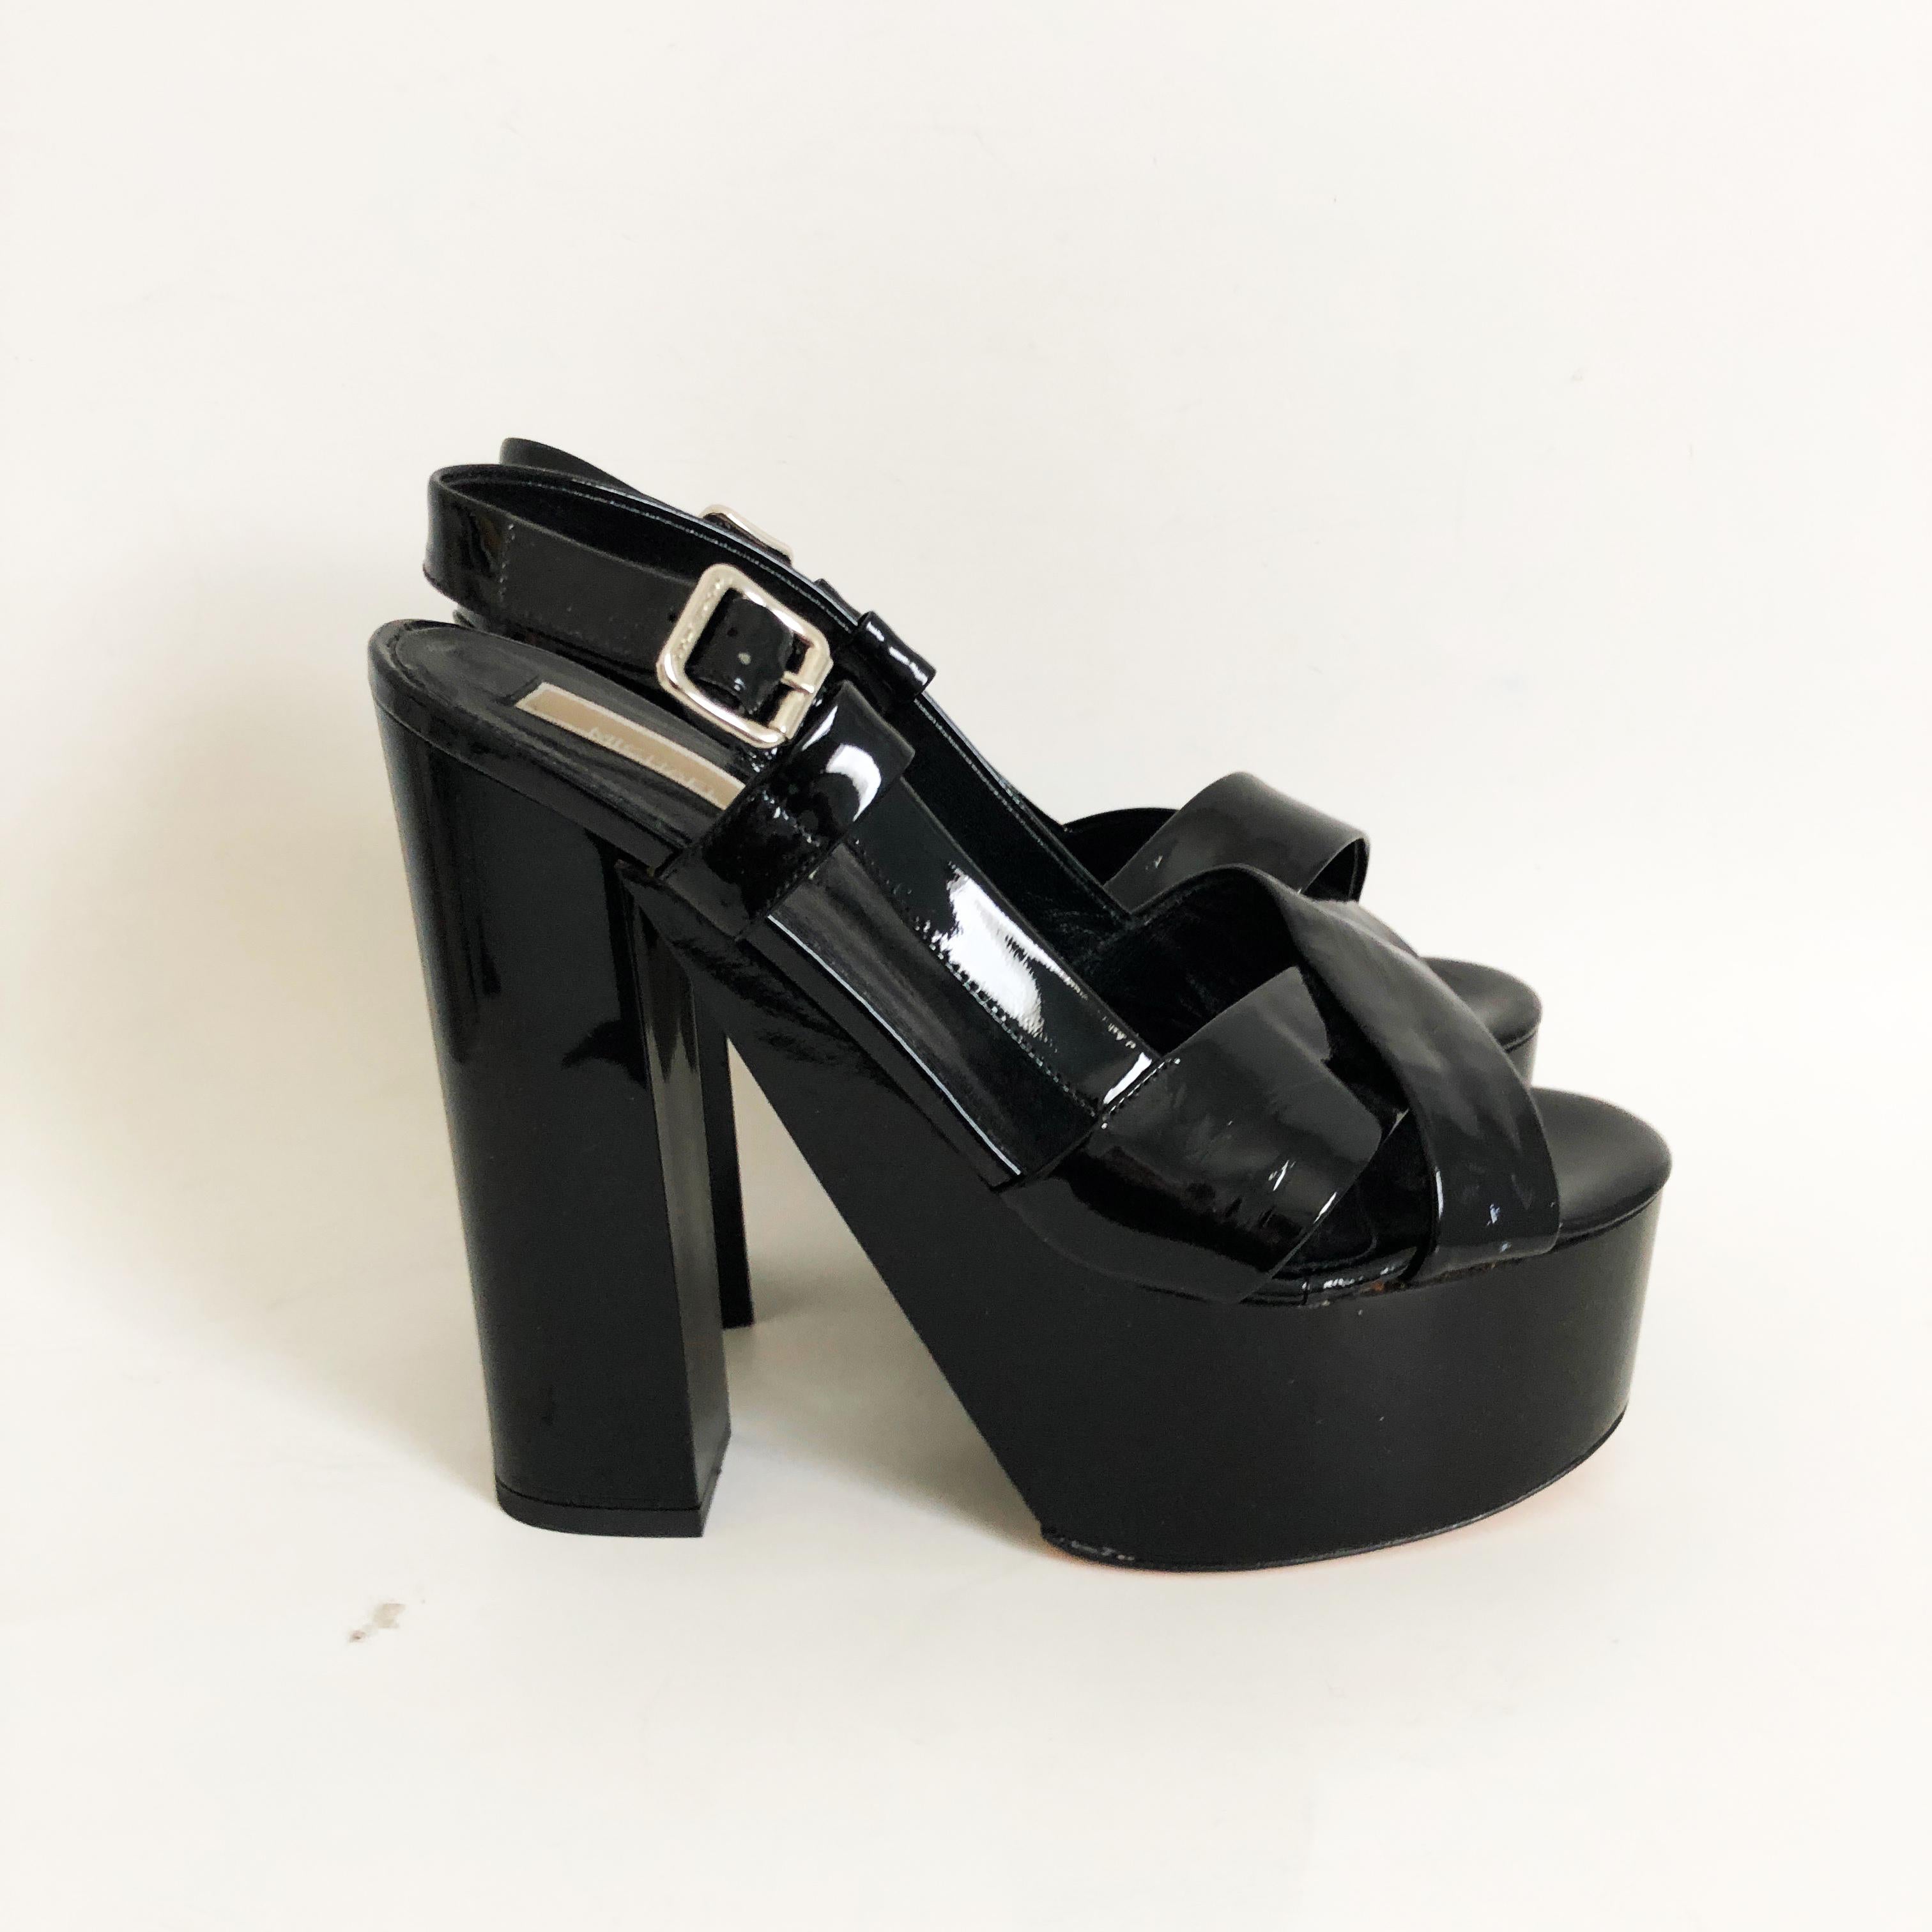 Authentic, preowned Michael Kors Black Patent Platform Sandals, size 7.5.  Definitely a retro Studio 54 vibe with these platforms!

Black patent leather.  Made in Italy.  Heels measure approximately 6in H, platforms measure 2in H. New old stock,